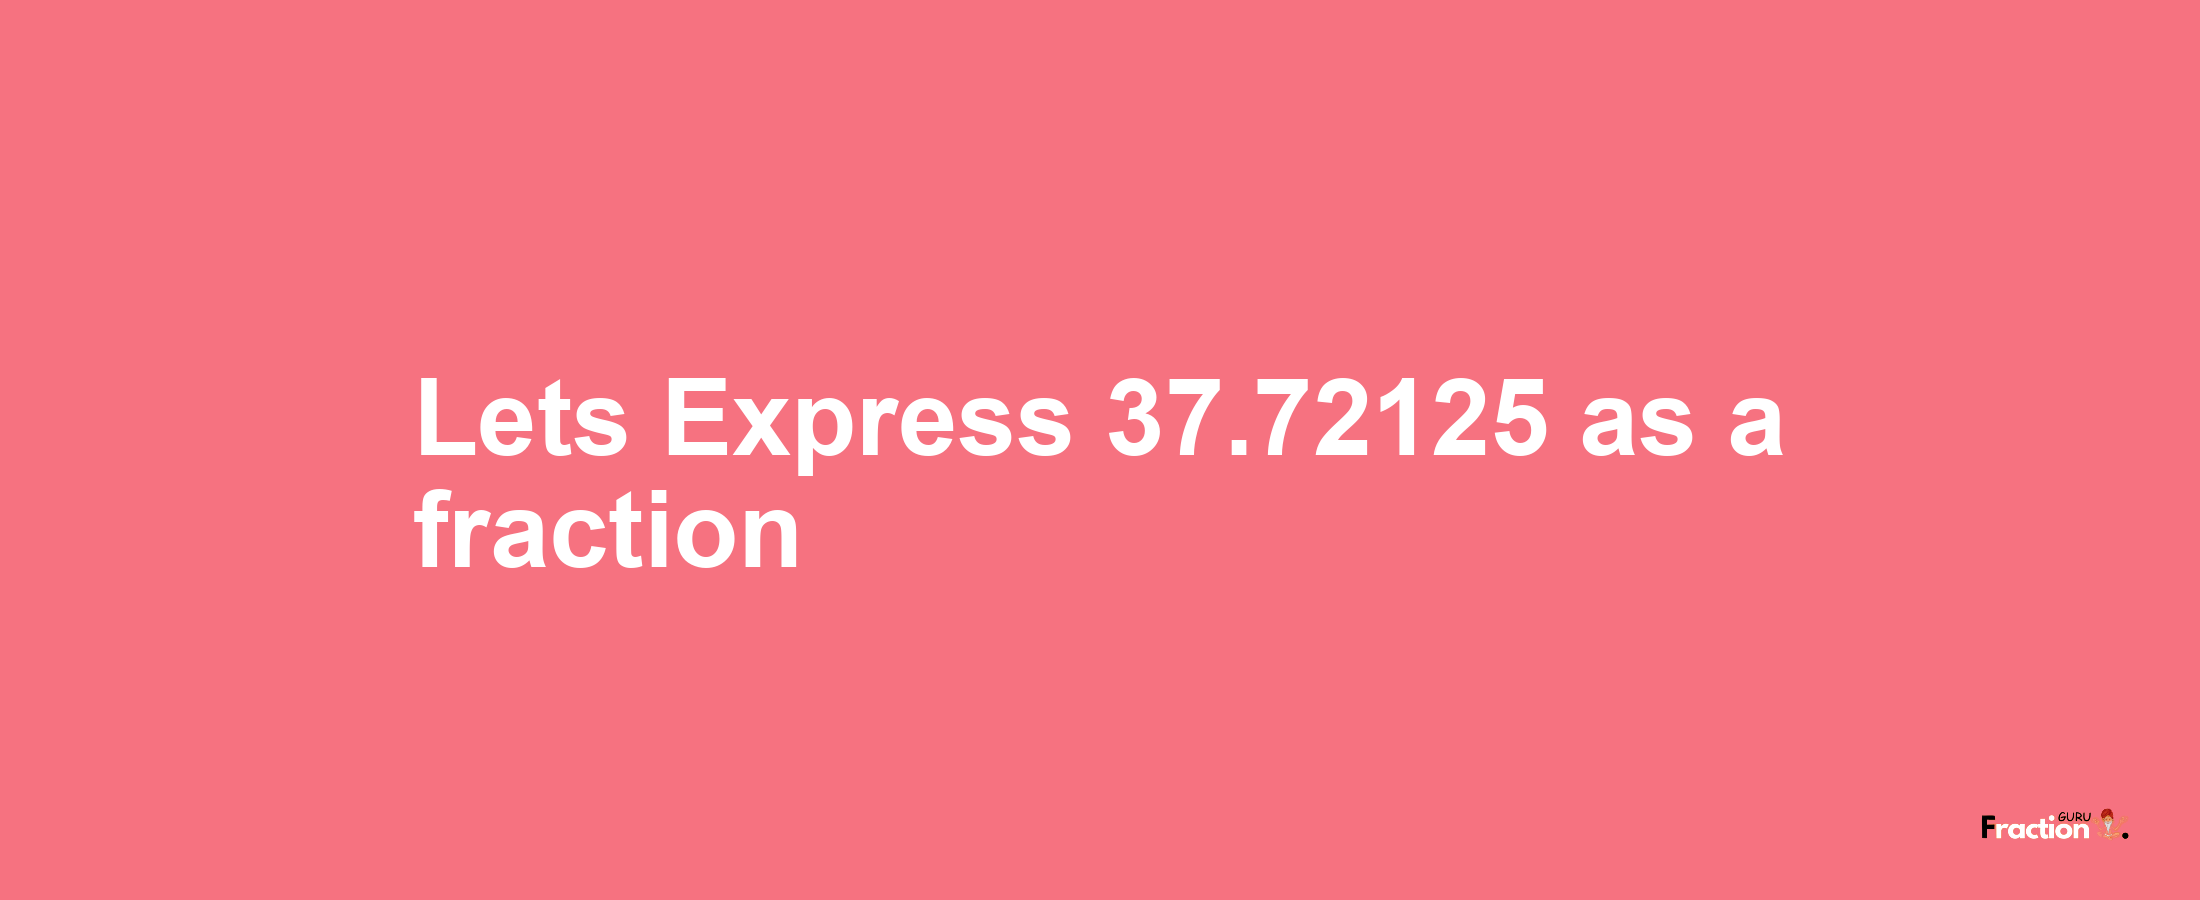 Lets Express 37.72125 as afraction